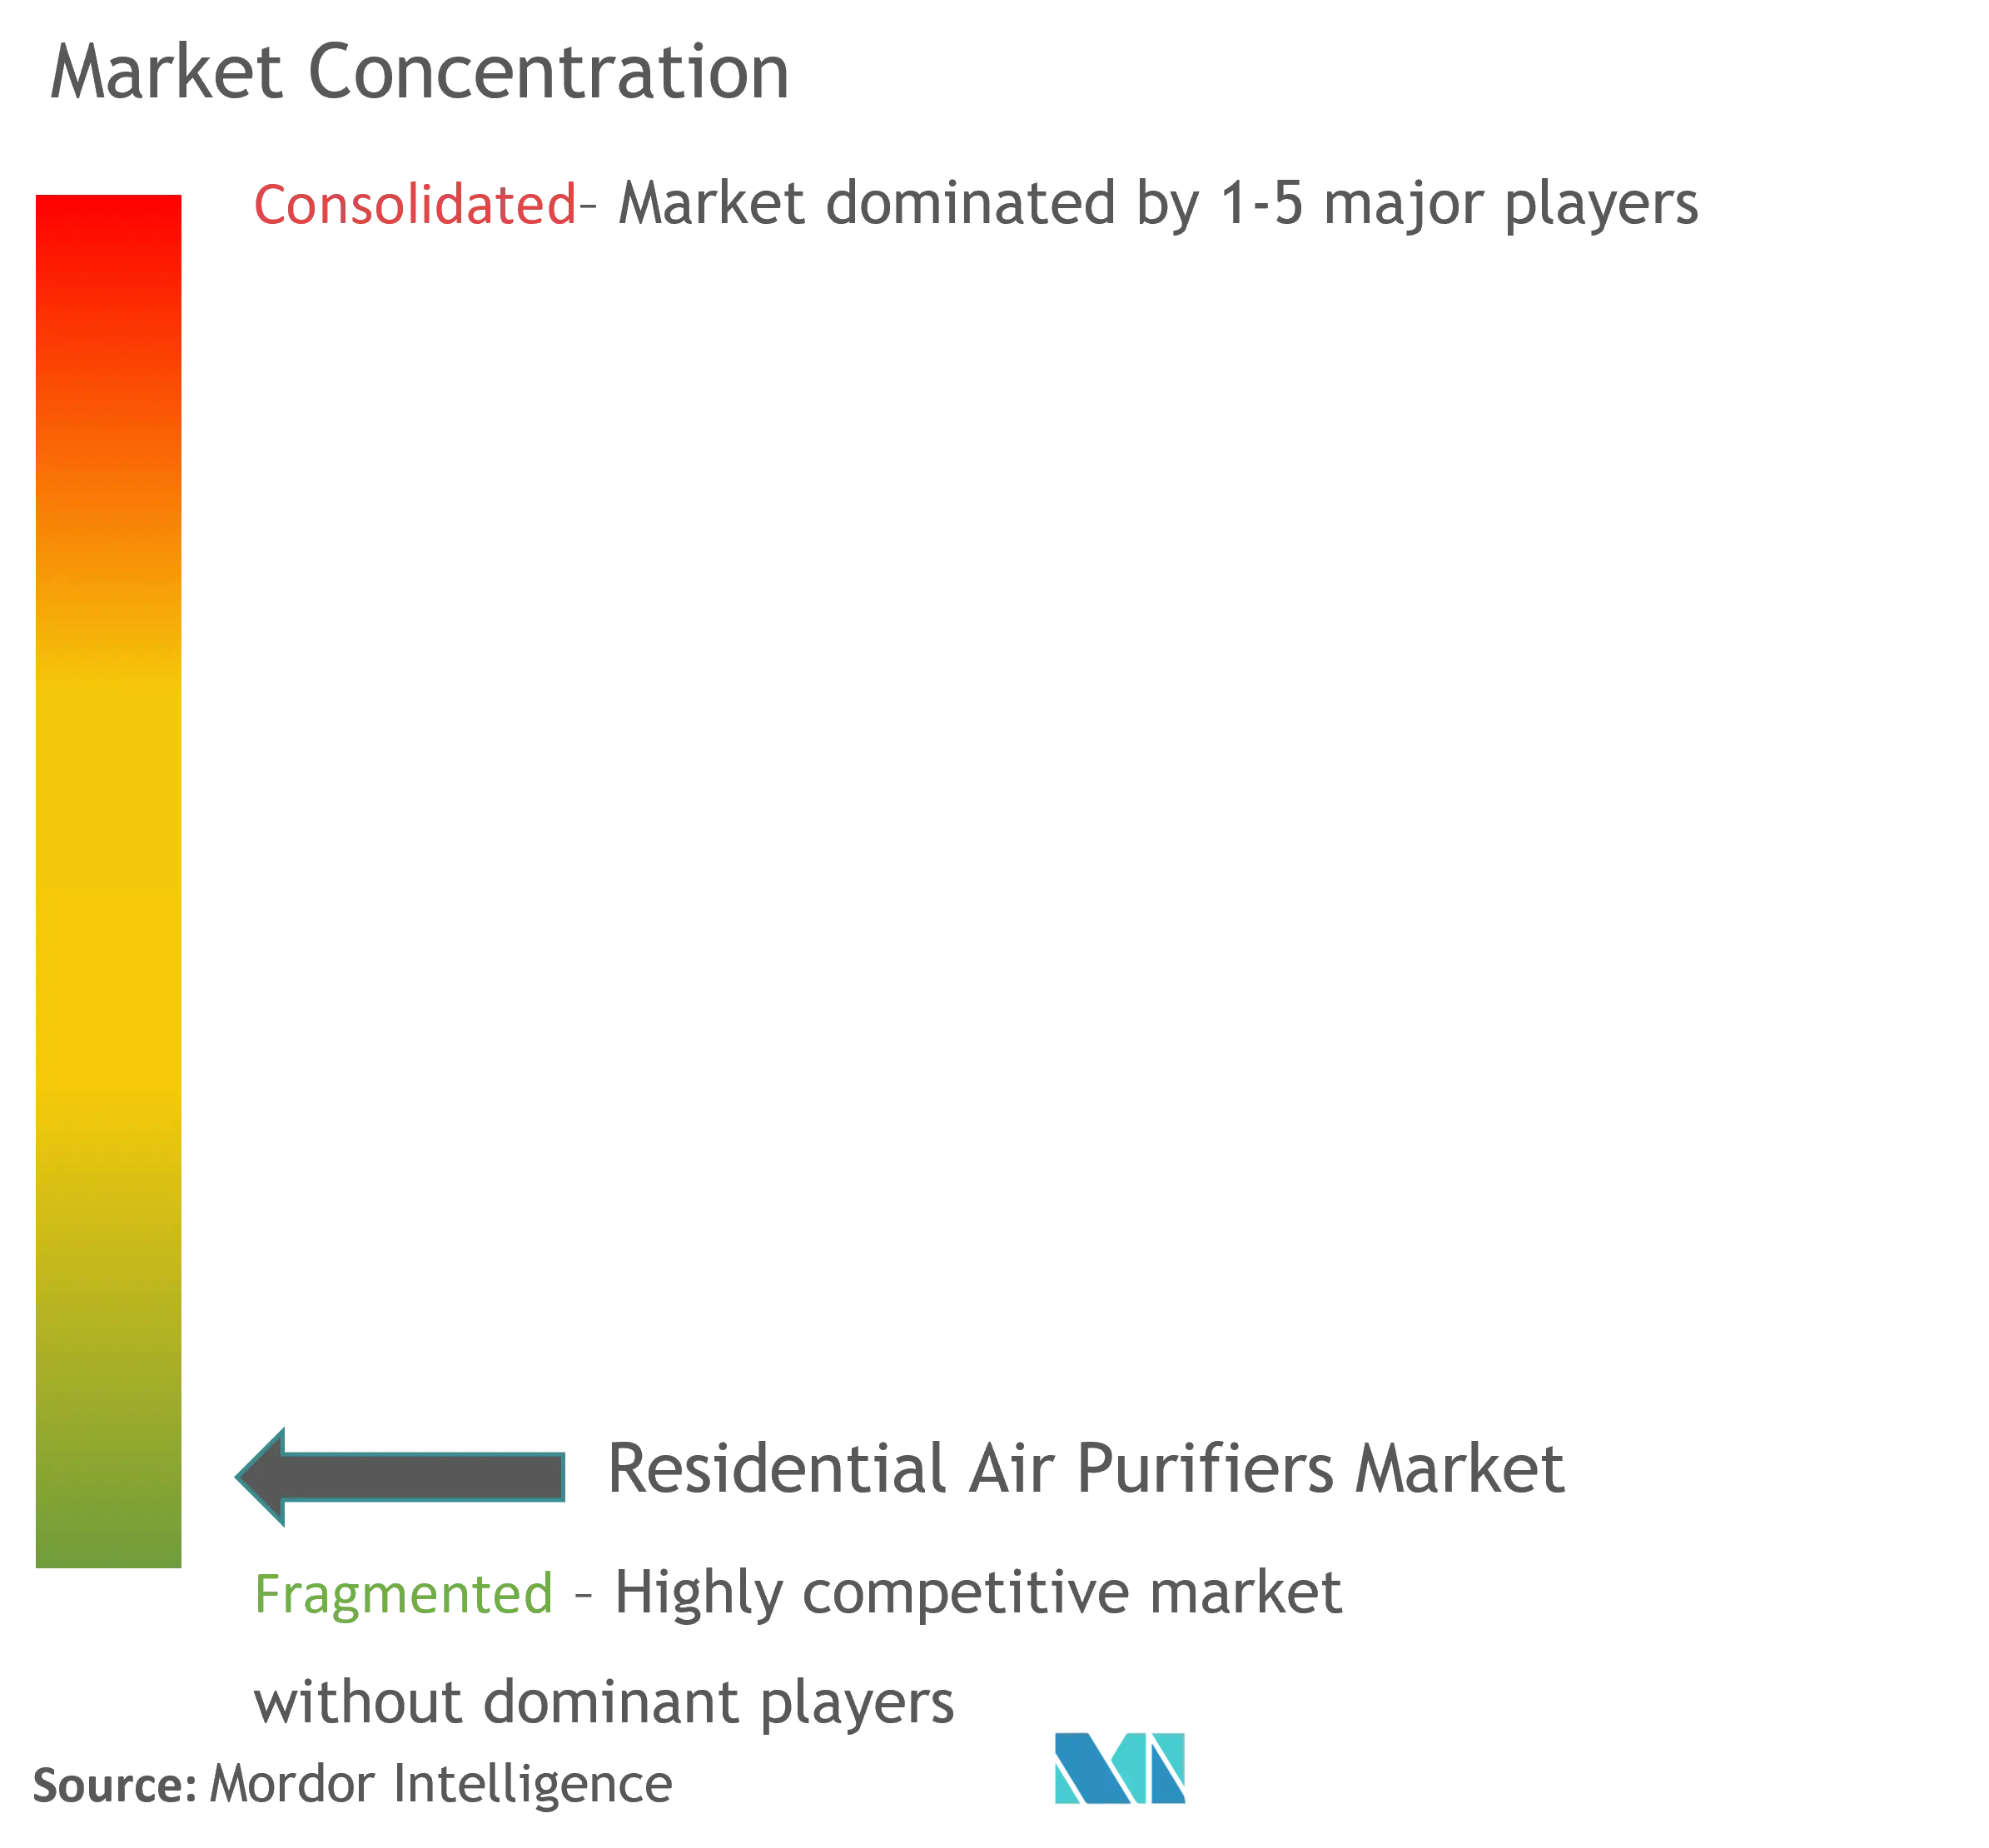 Residential Air Purifiers Market Concentration